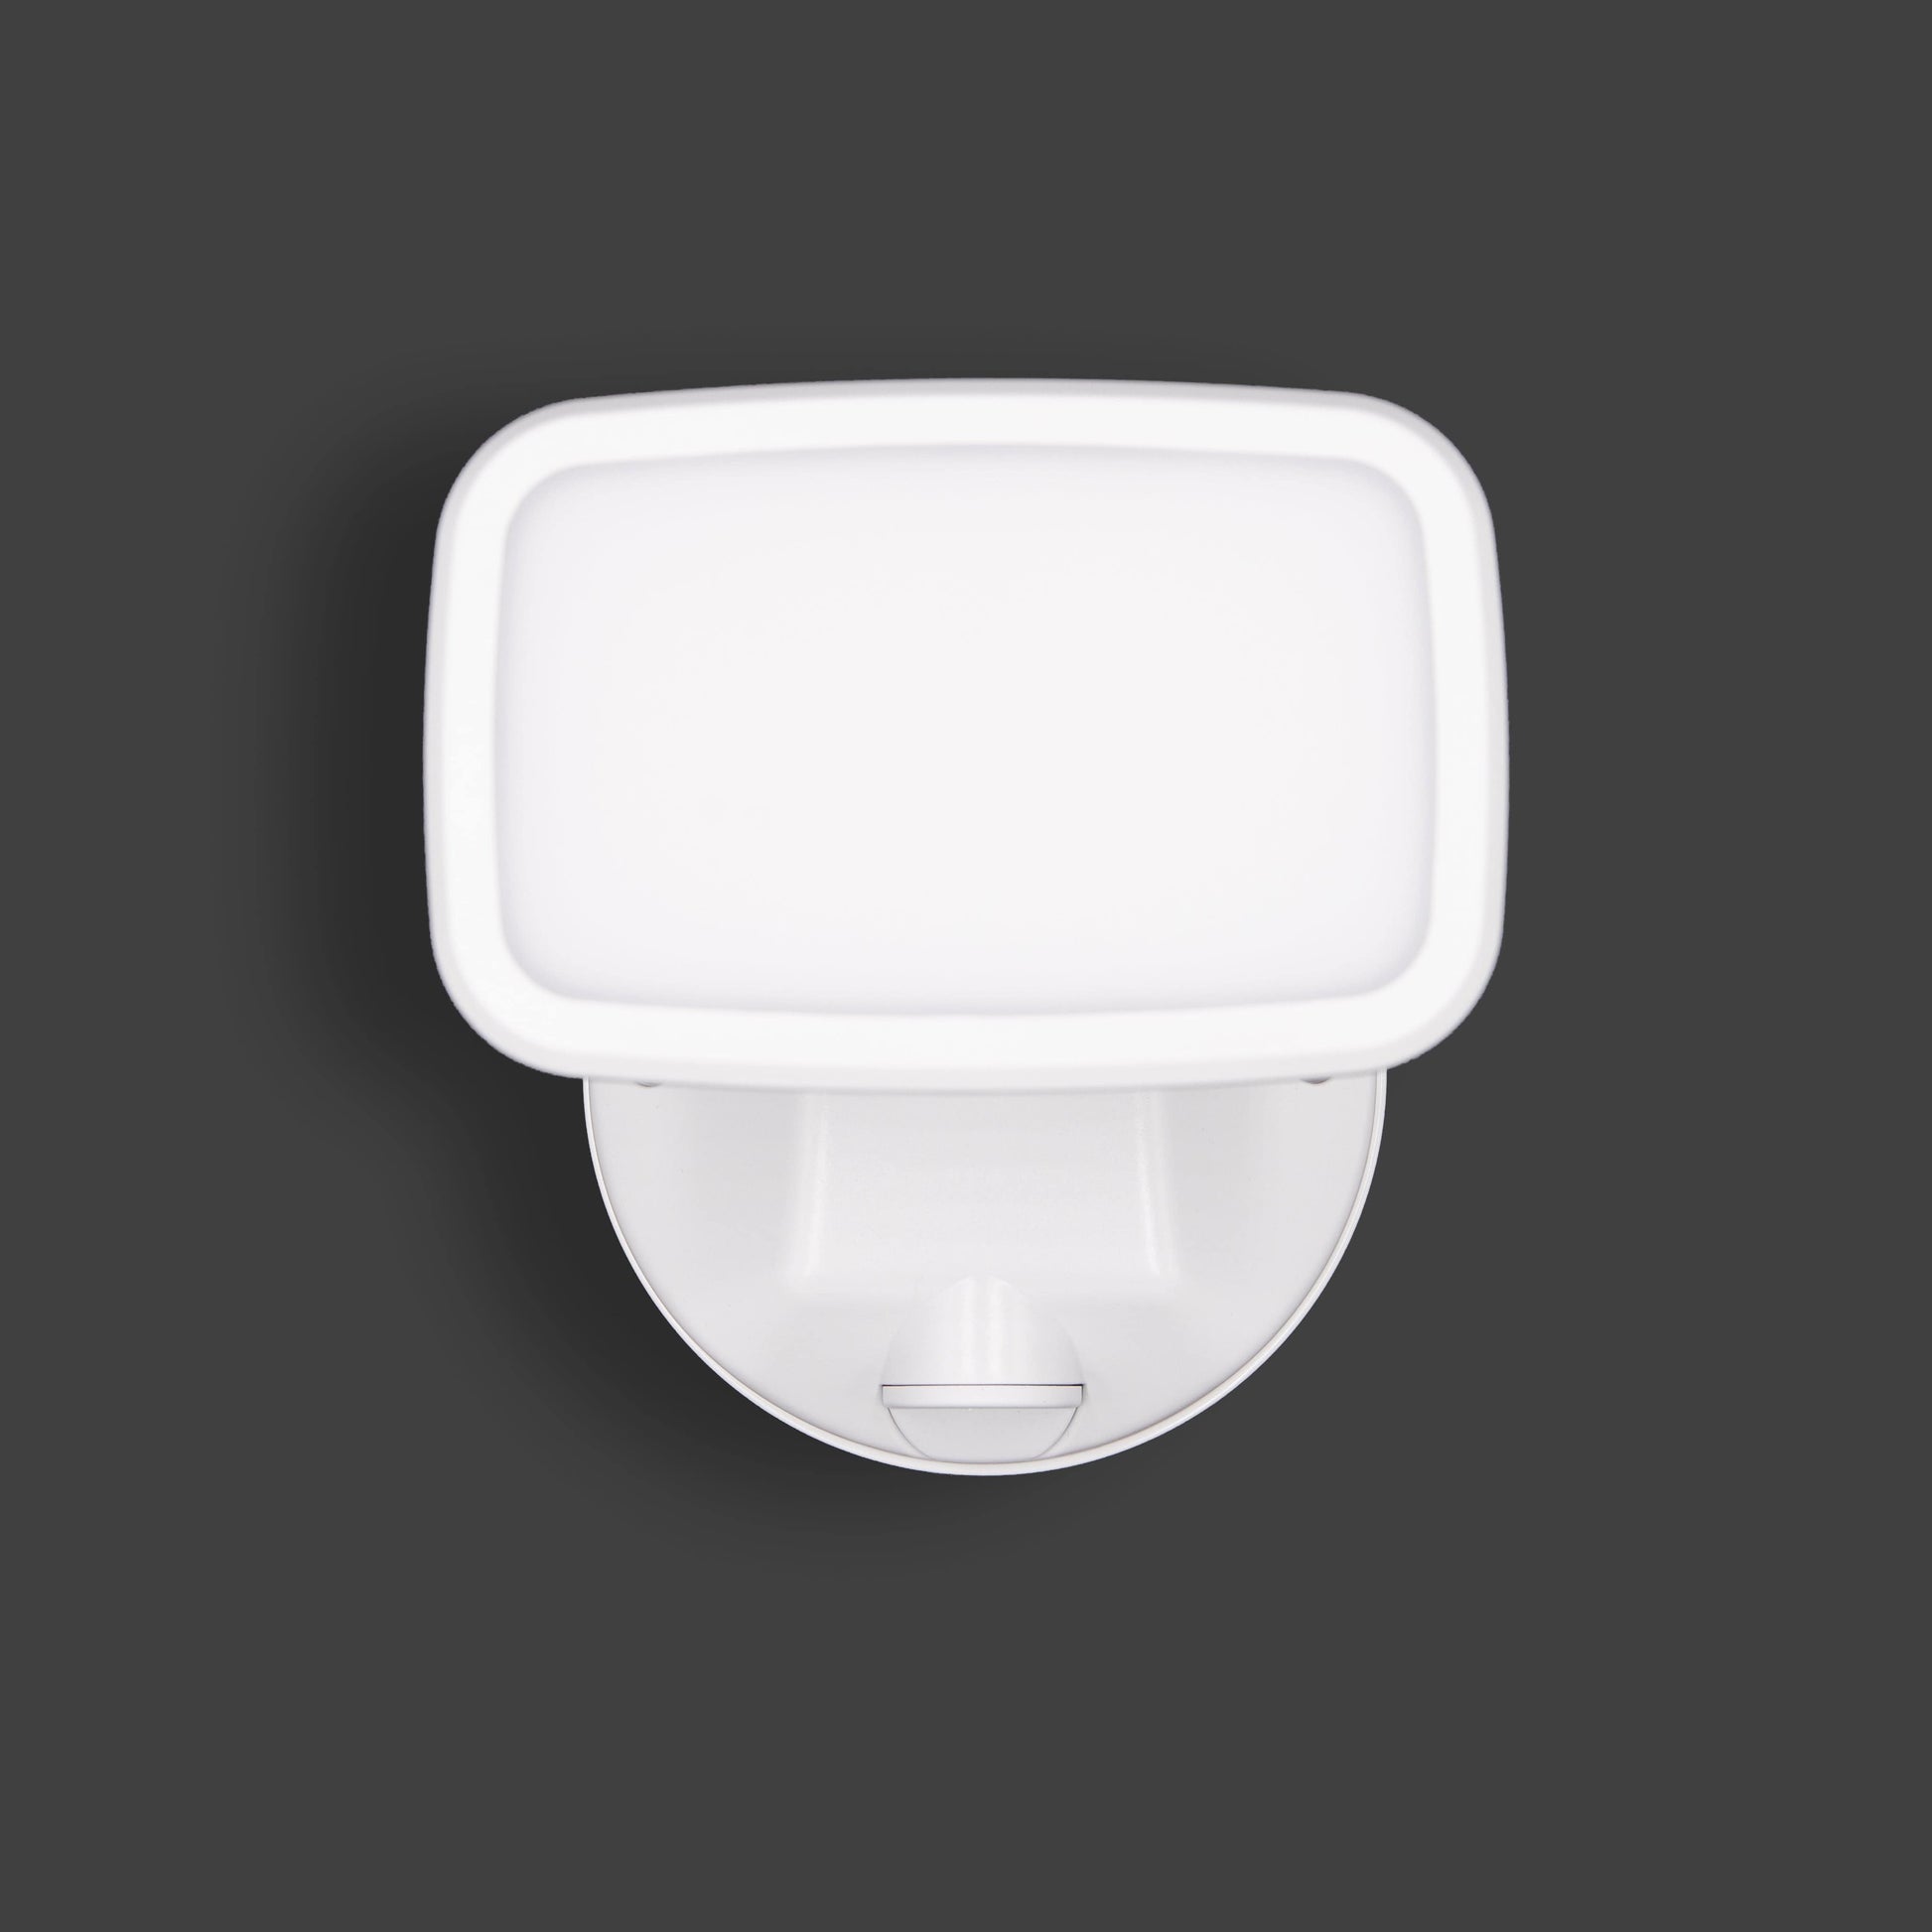 Lights  -  Our Lynn Security Wall Light - White  -  60002037